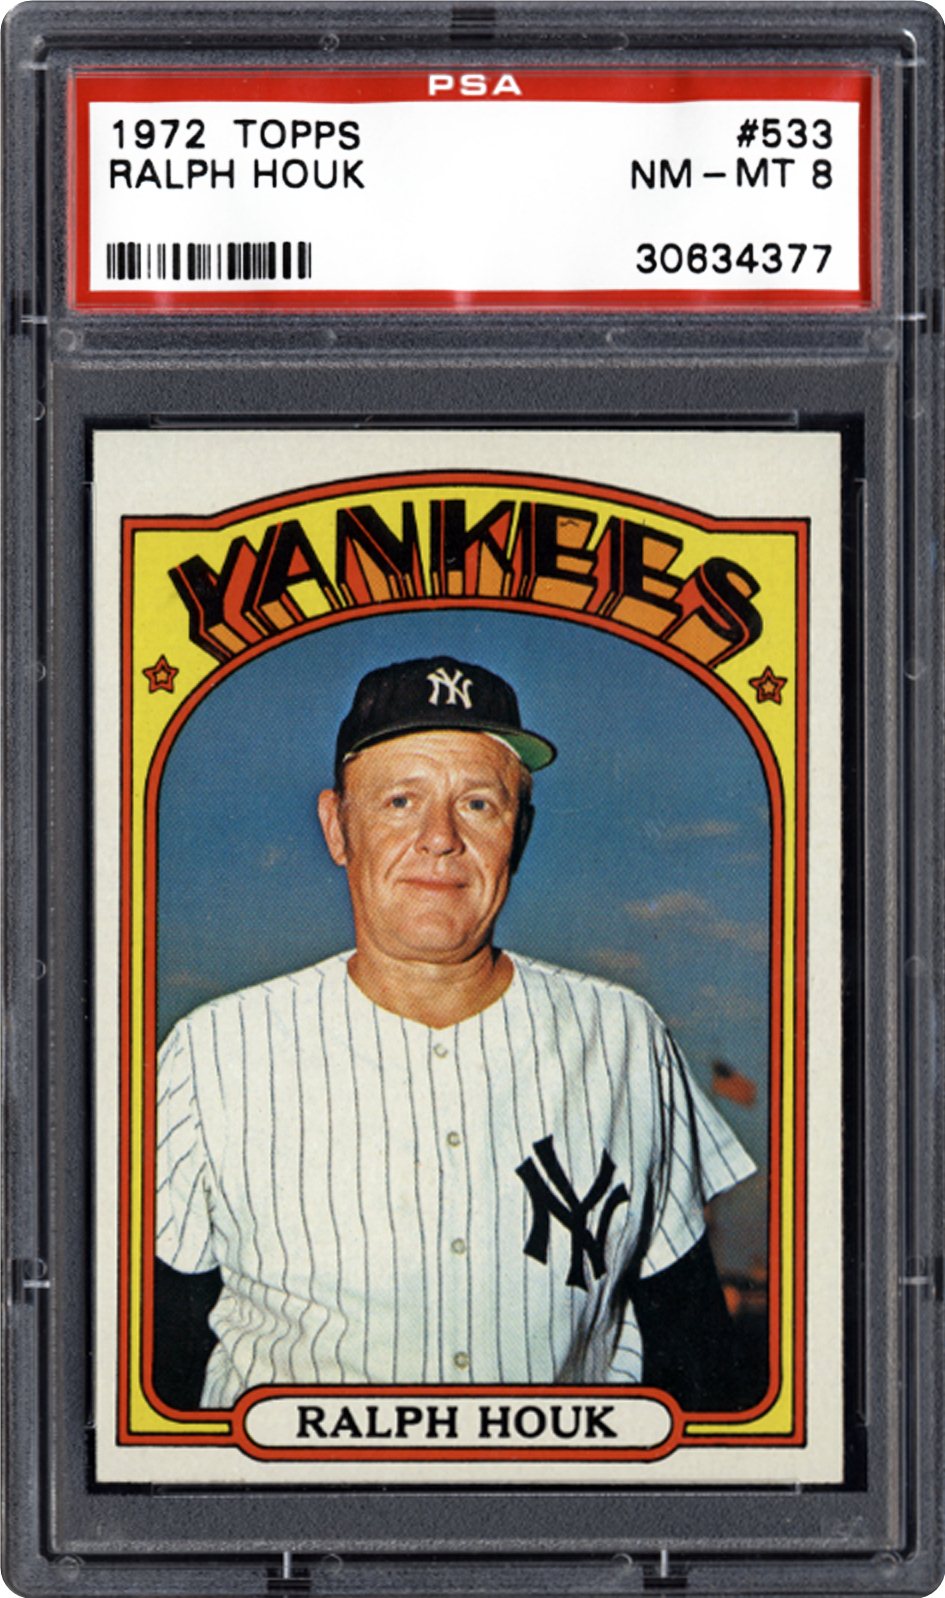 1972 Topps Ralph Houk | PSA CardFacts™